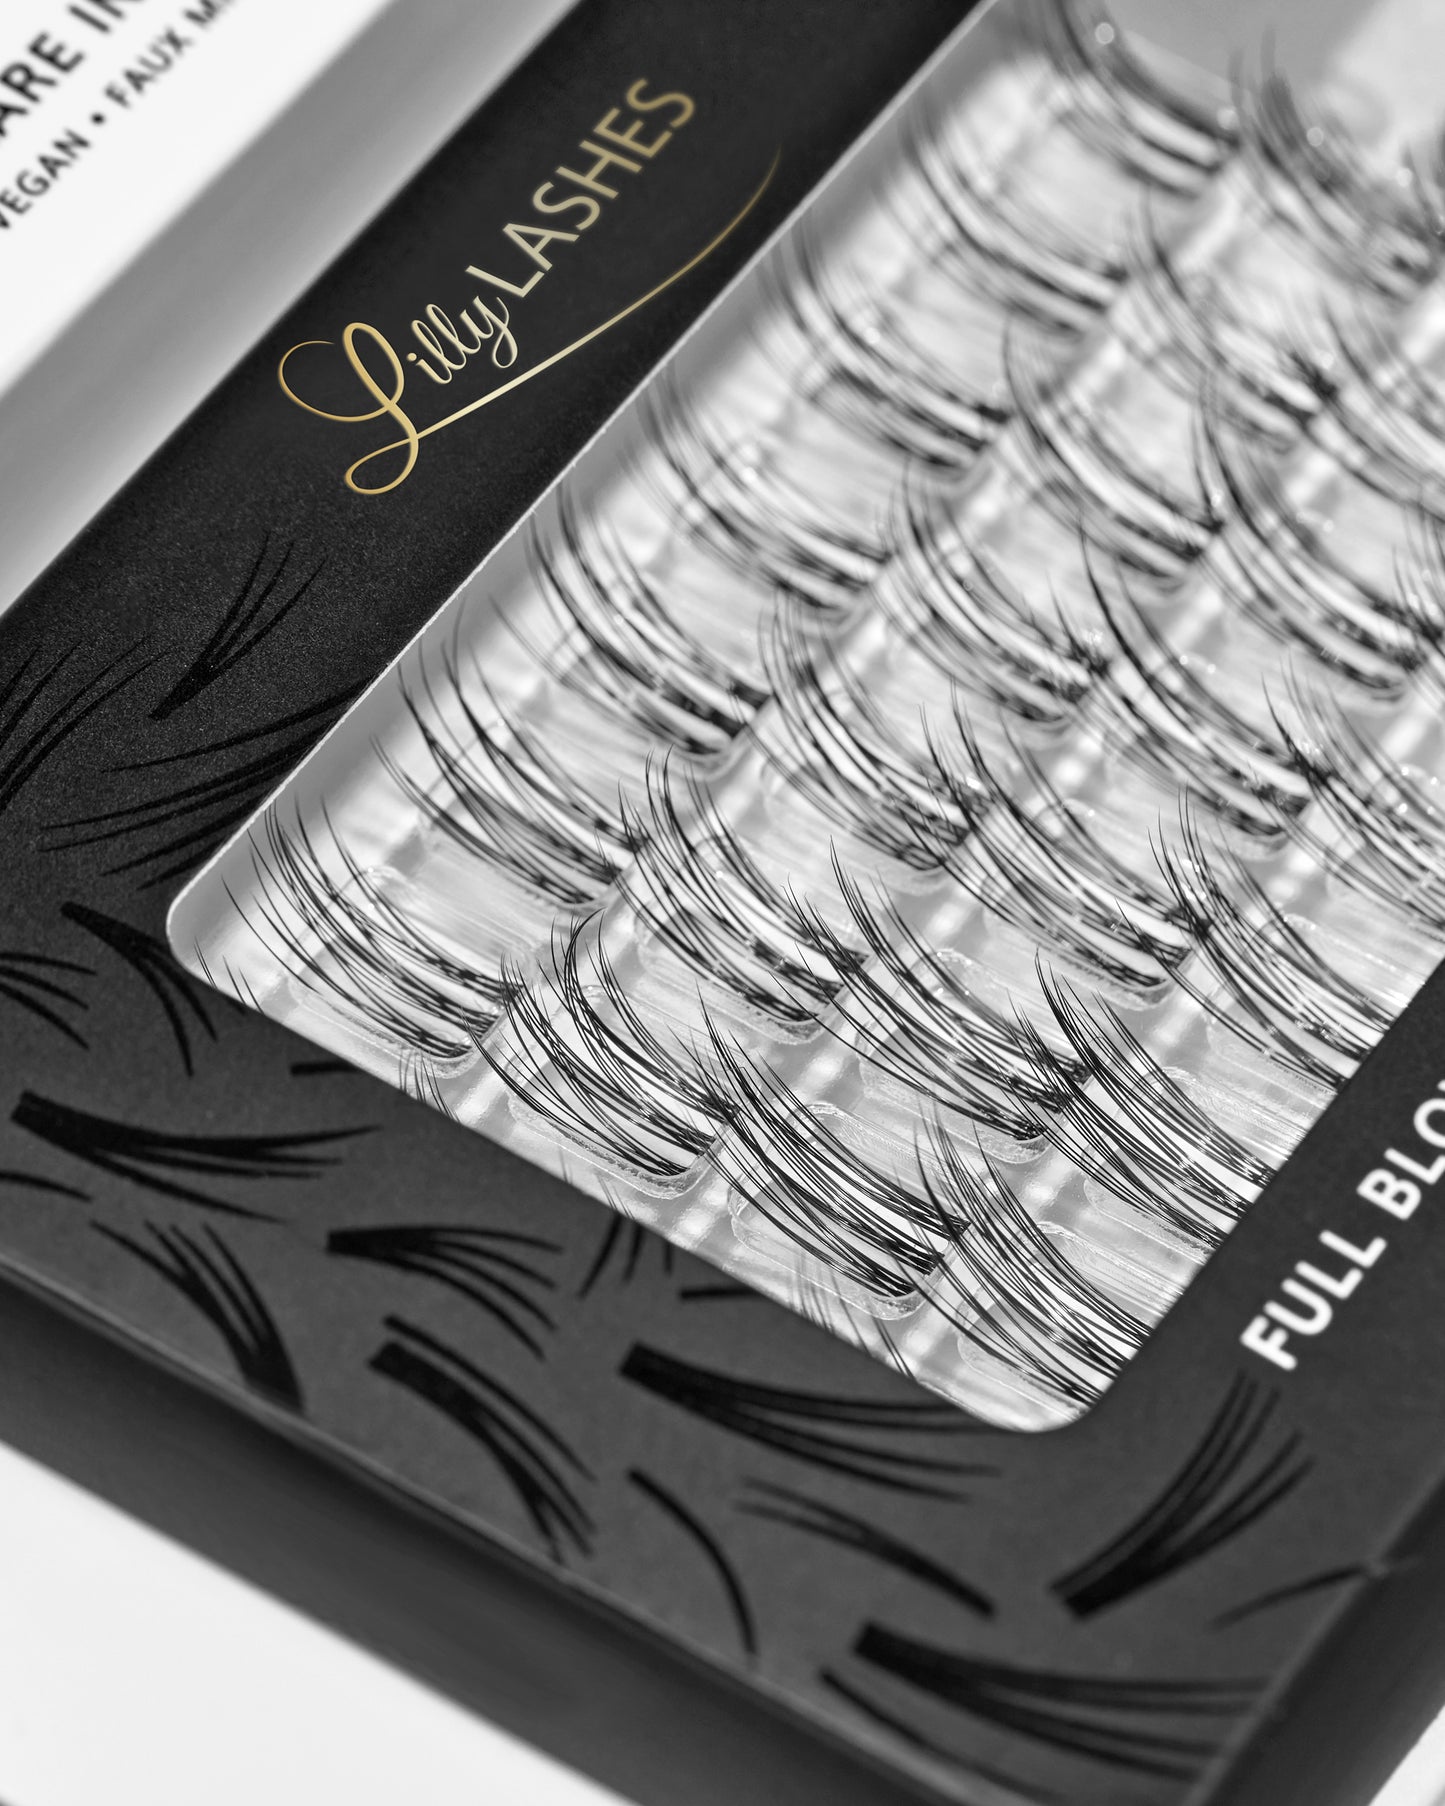 Lilly Lashes | Individual Lashes | Full Blown Flare Up